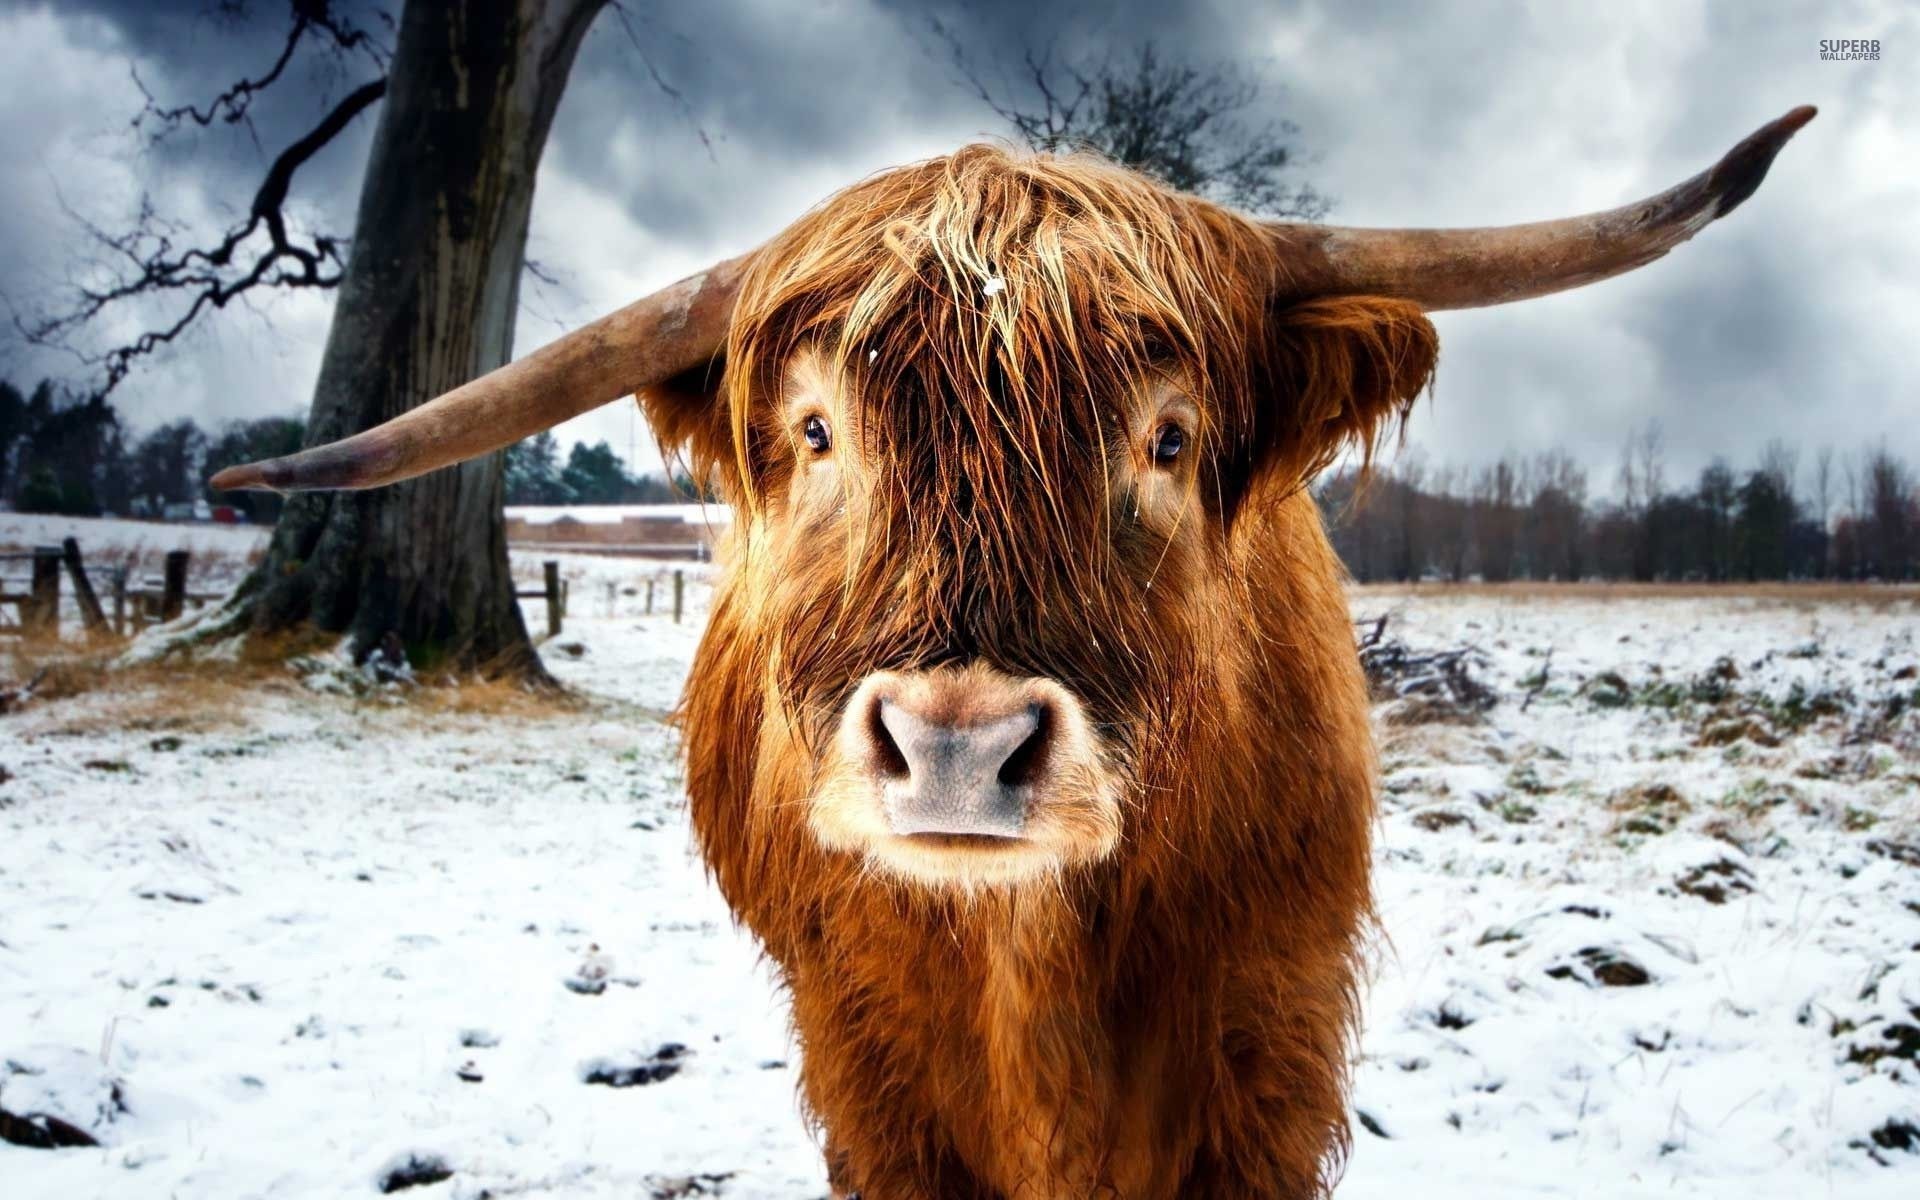 Highland cow wallpapers, Beautiful visual backgrounds, Stunning high-quality images, Captivating natural beauty, 1920x1200 HD Desktop